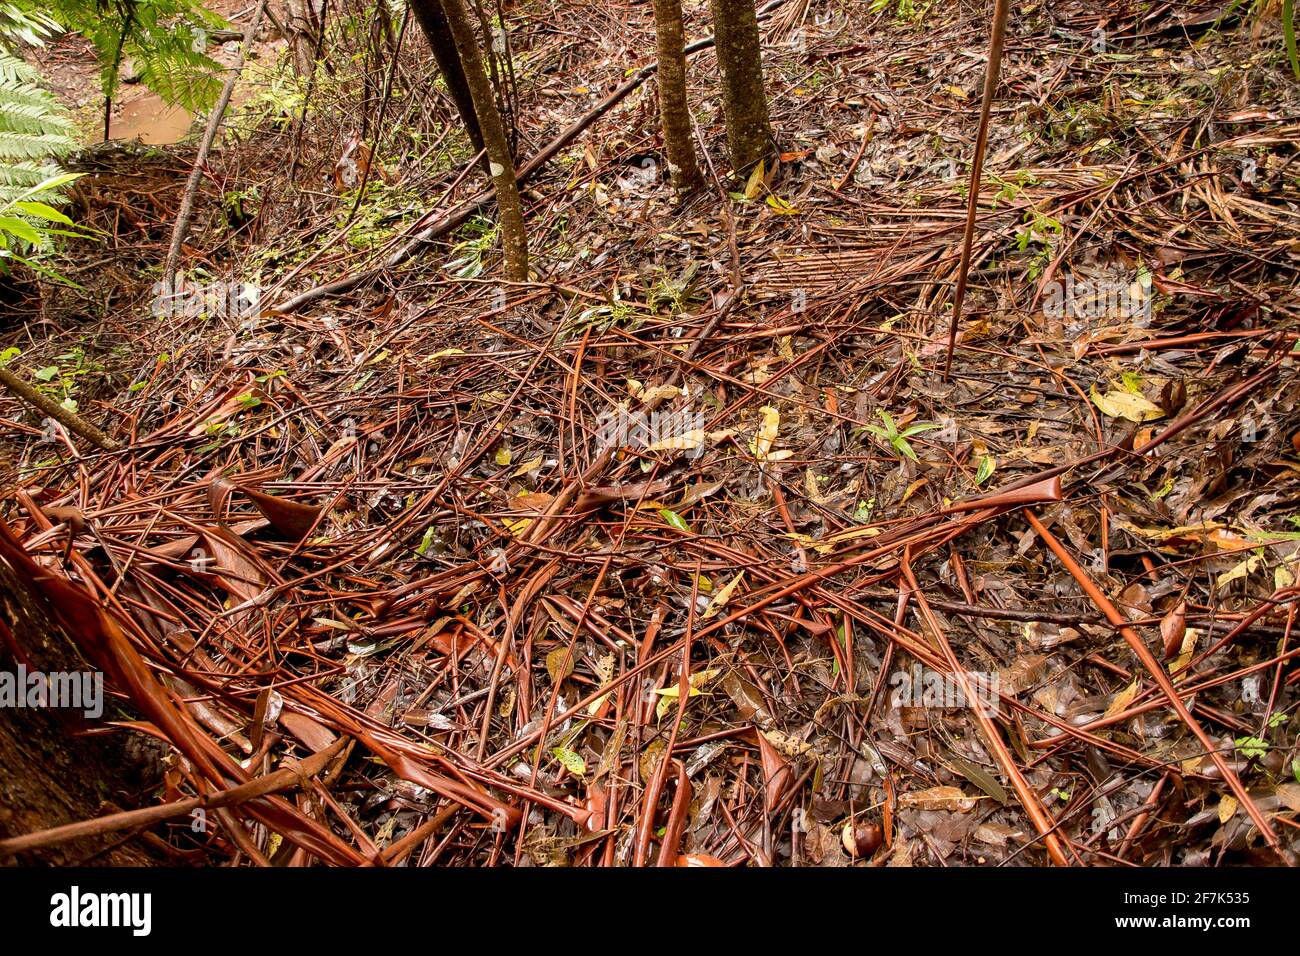 Organic debris on forest floor in Australian lowland subtropical rainforest in Queensland. Bark, leaves, fronds, form thick ground covering. Stock Photo